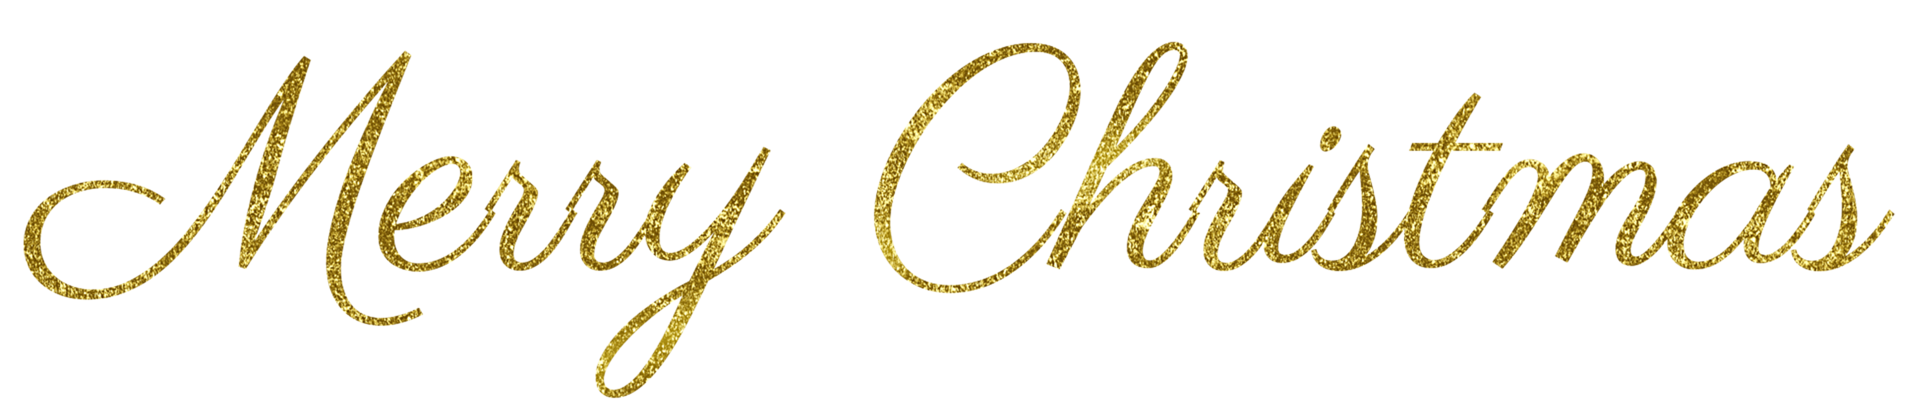 Golden Text Merry Christmas cut out 13078943 PNG